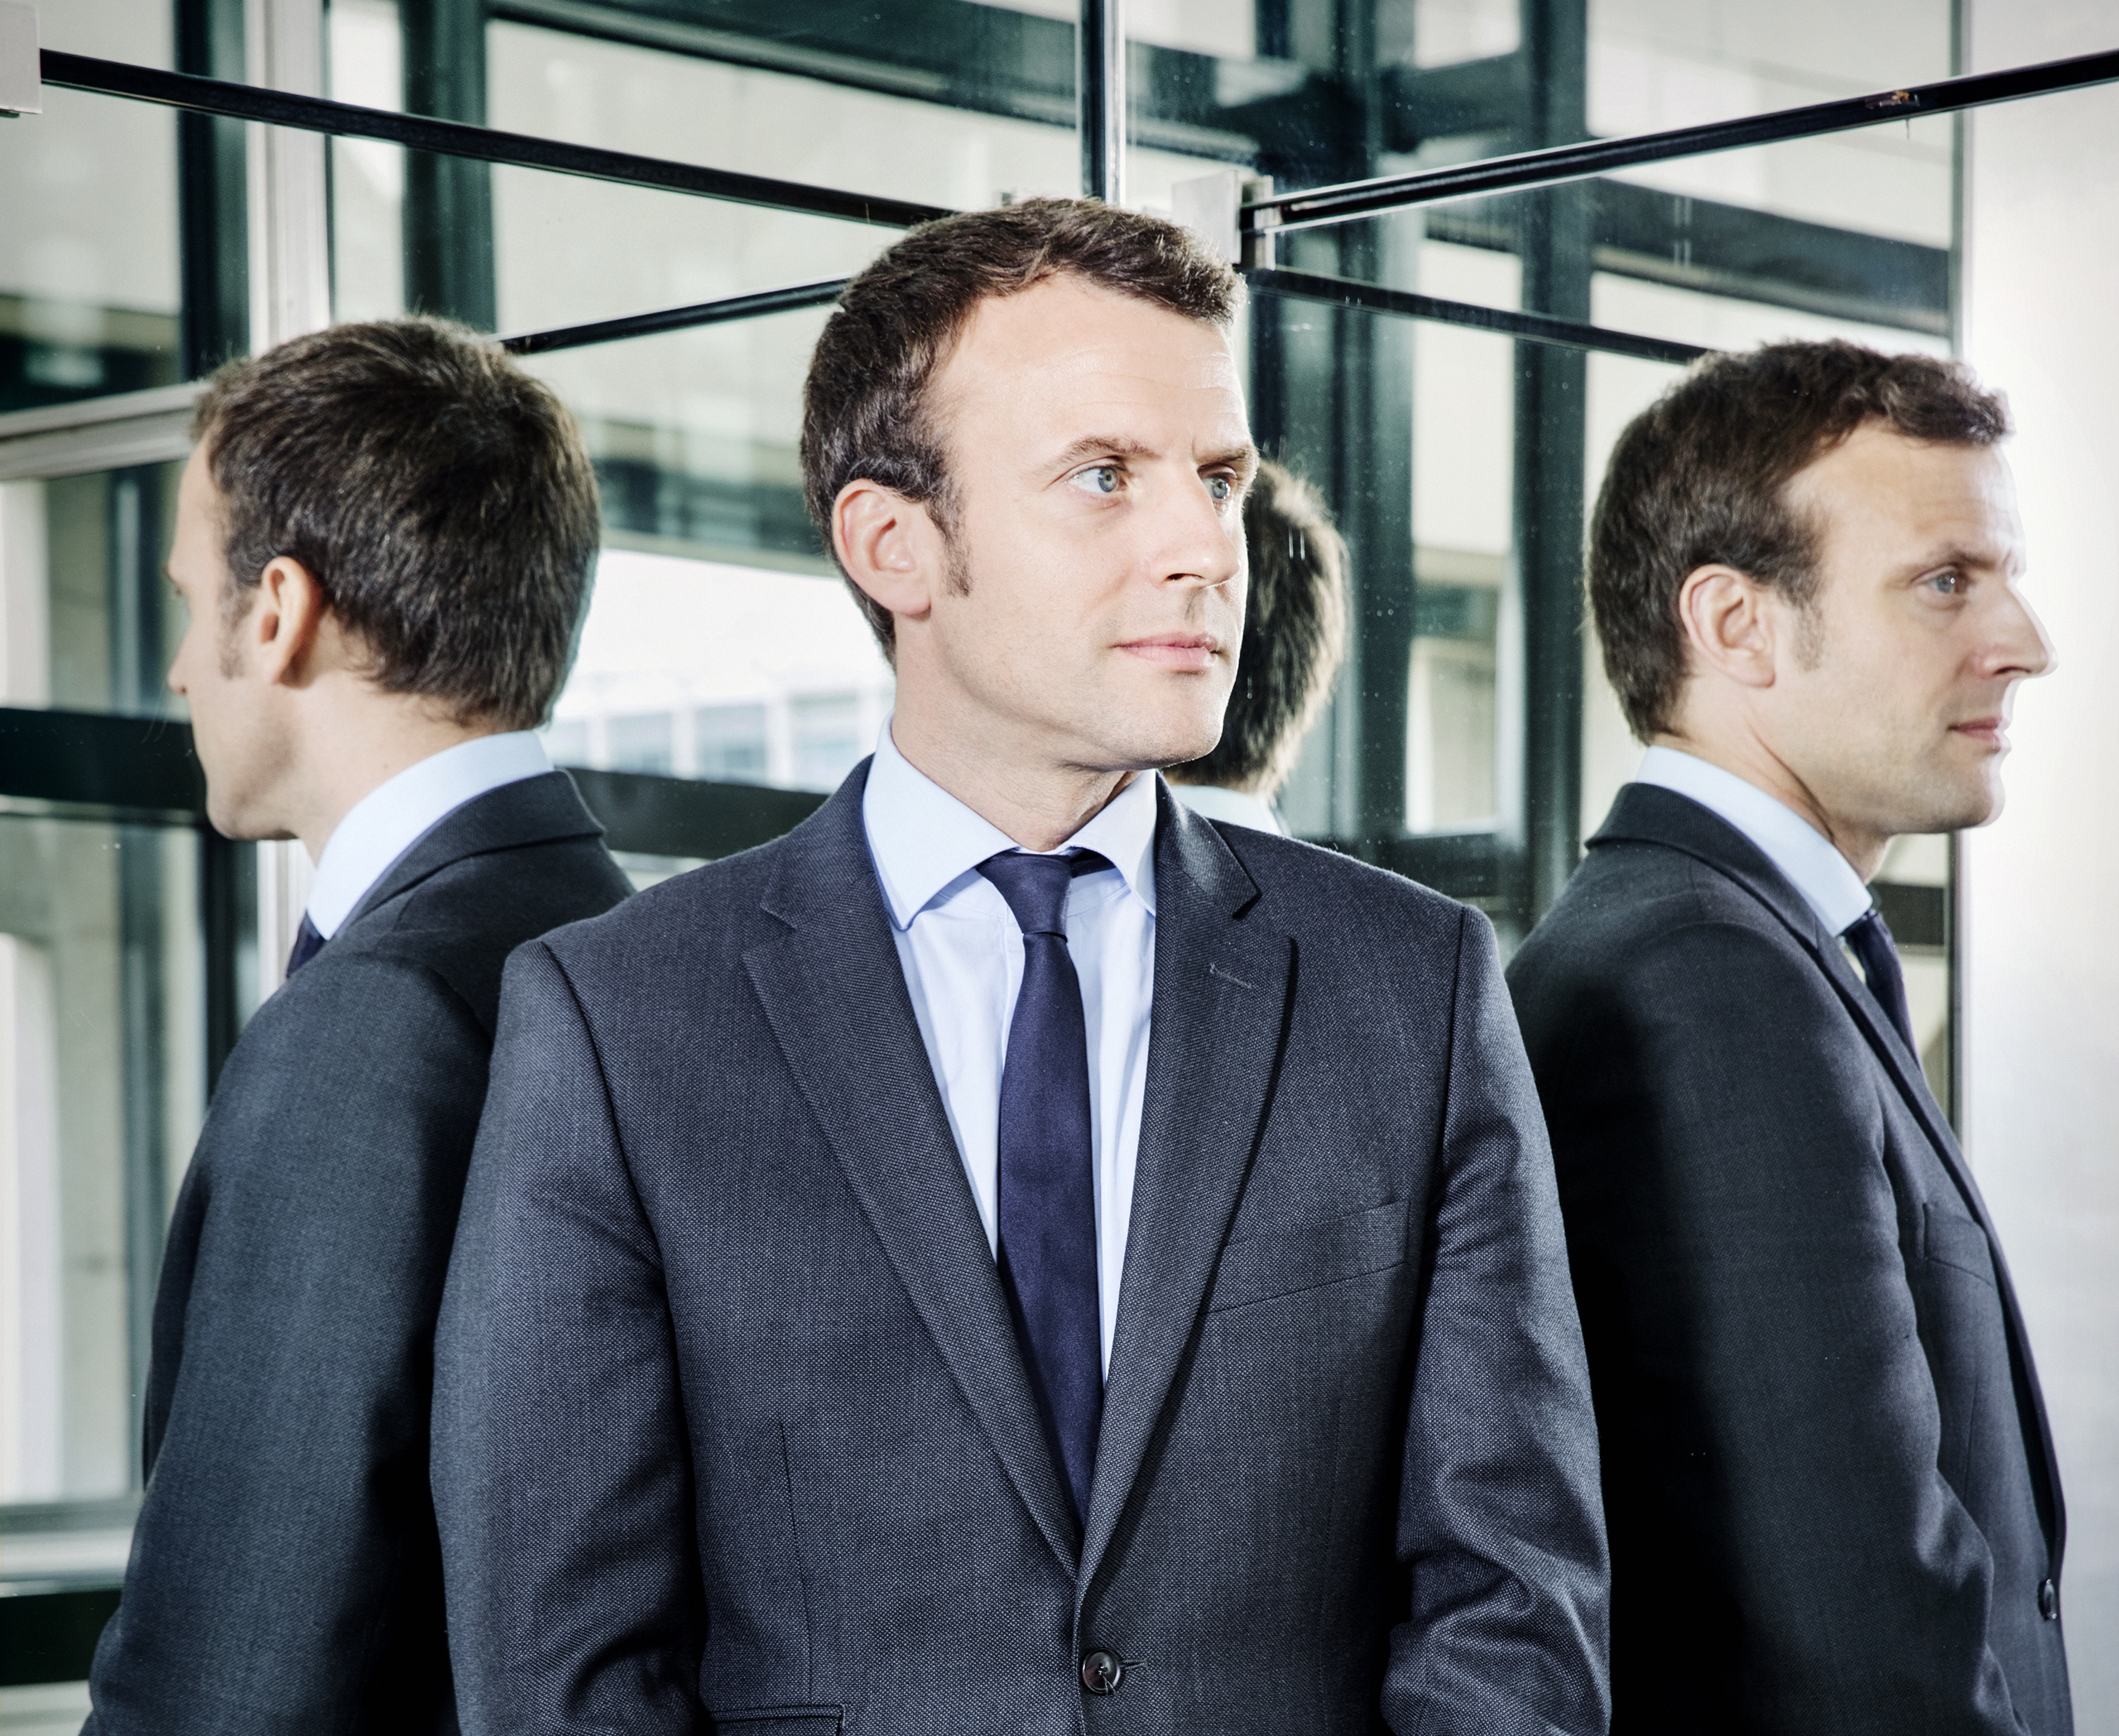 Emmanuel Macron, France's Minister for the Economy, Industry and Digital Affairs, in the Ministry of Economy and Finance in Paris on June 13, 2016. (Paolo Verzone—Agence VU for TIME)